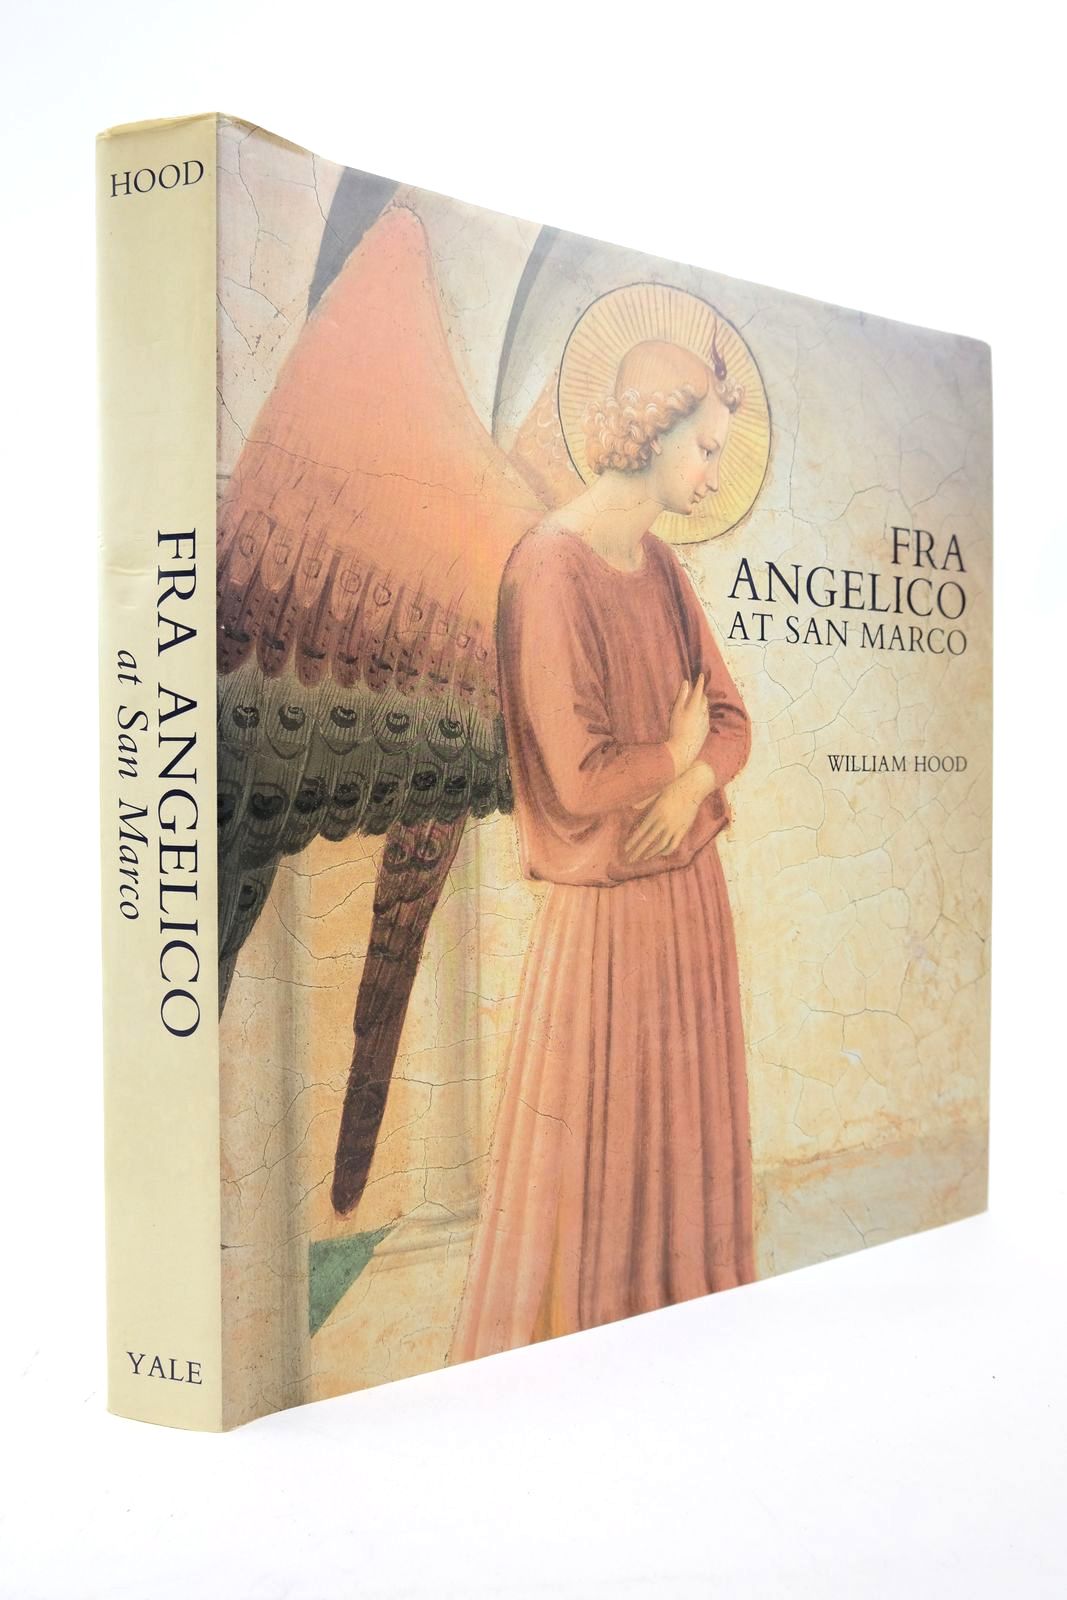 Photo of FRA ANGELICO AT SAN MARCO written by Hood, William published by Yale University Press (STOCK CODE: 2139032)  for sale by Stella & Rose's Books